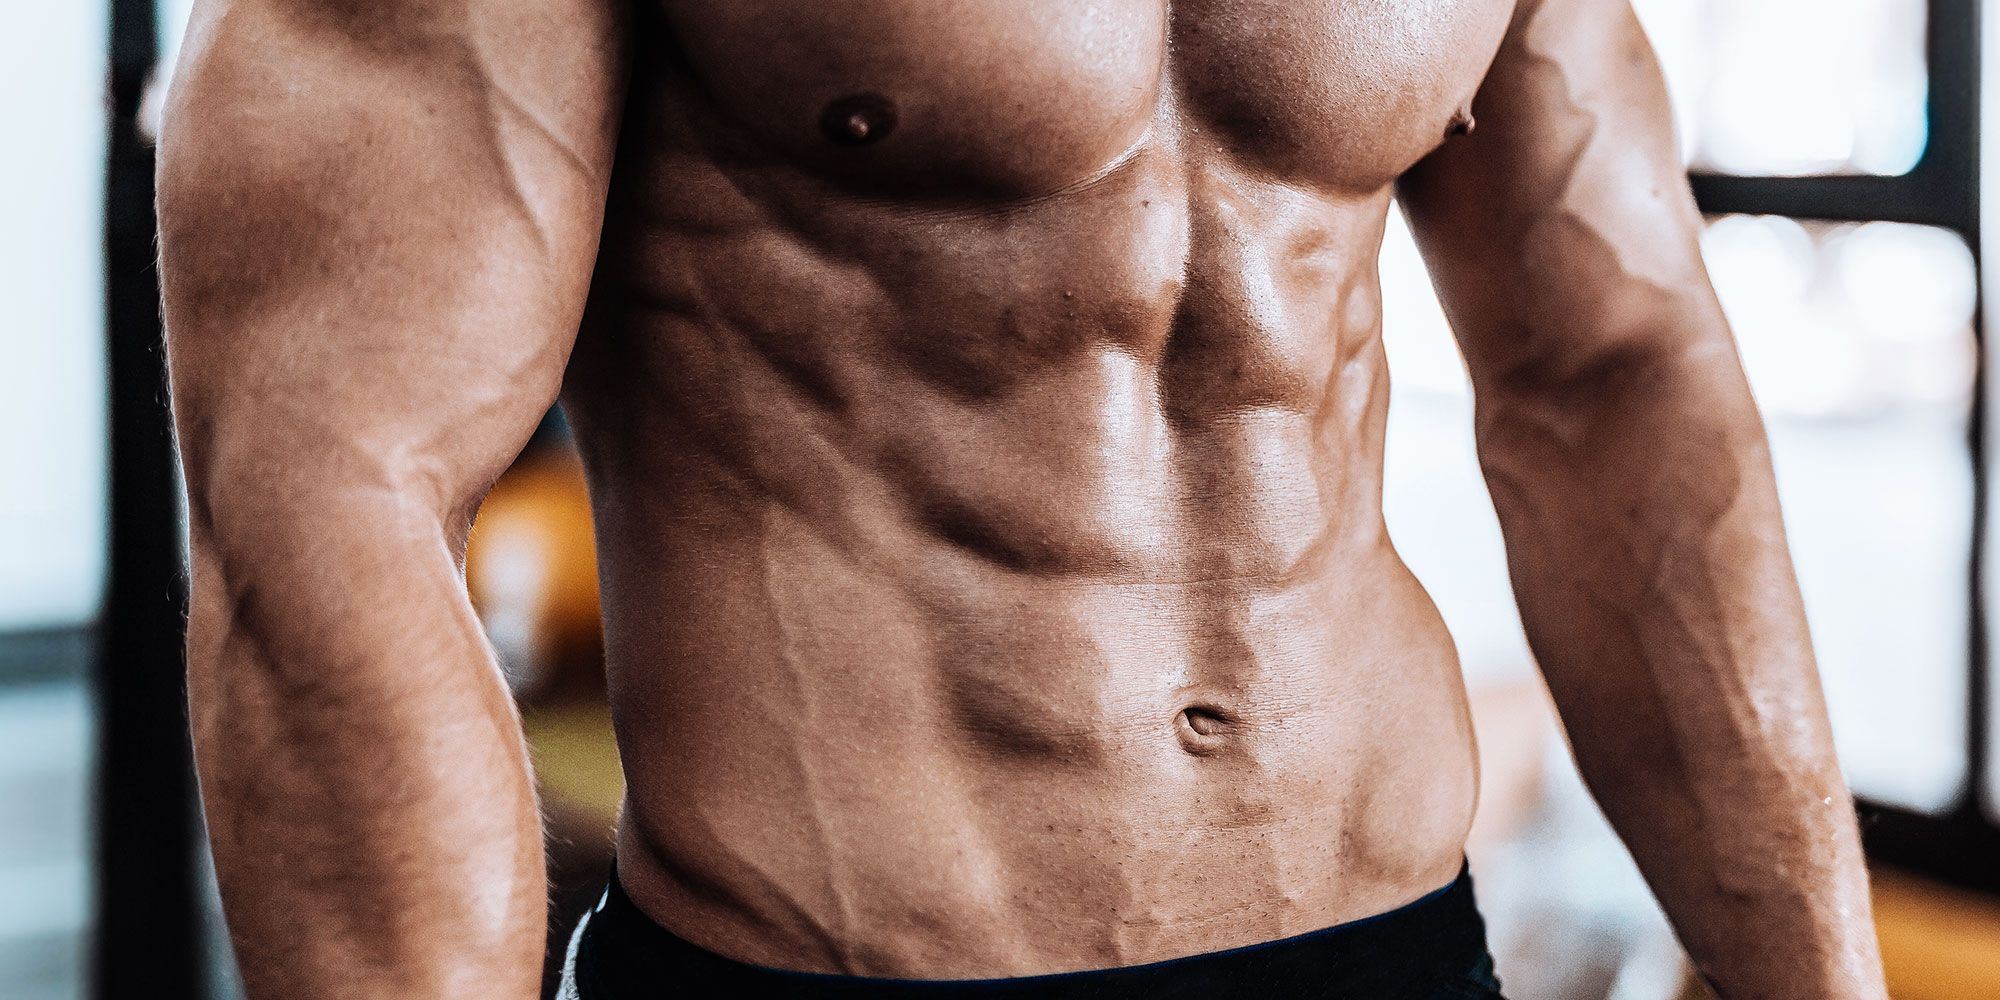 Guys With Six-Pack Abs Share What Its Like to Be Ripped